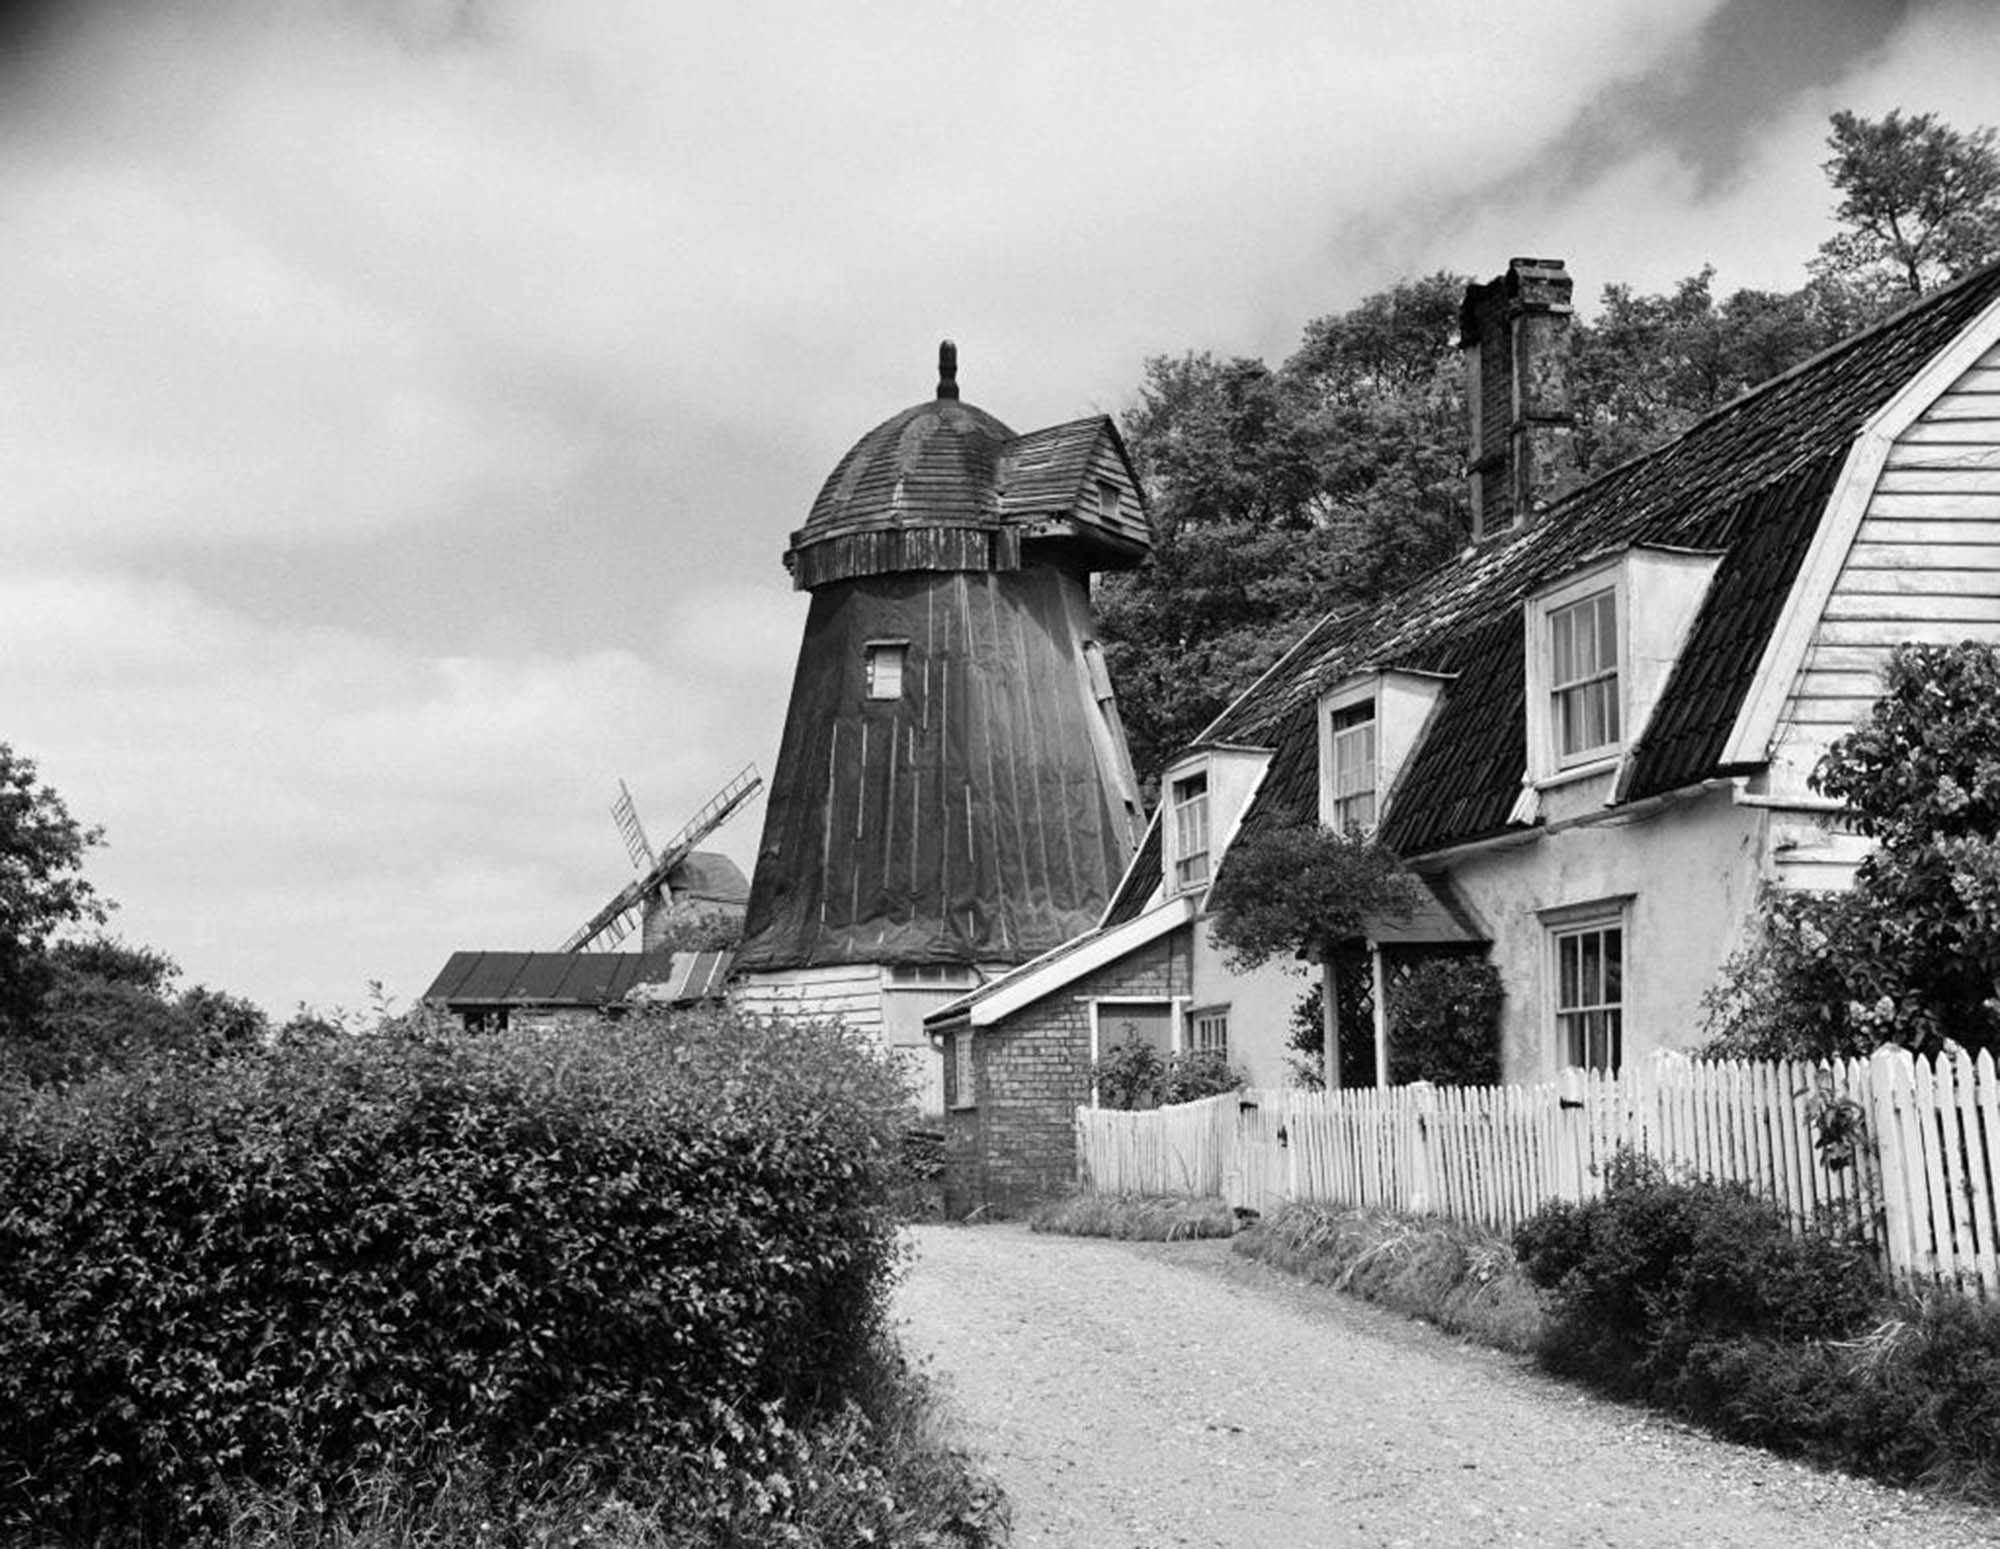 General view from lane showing cap of post mill in background